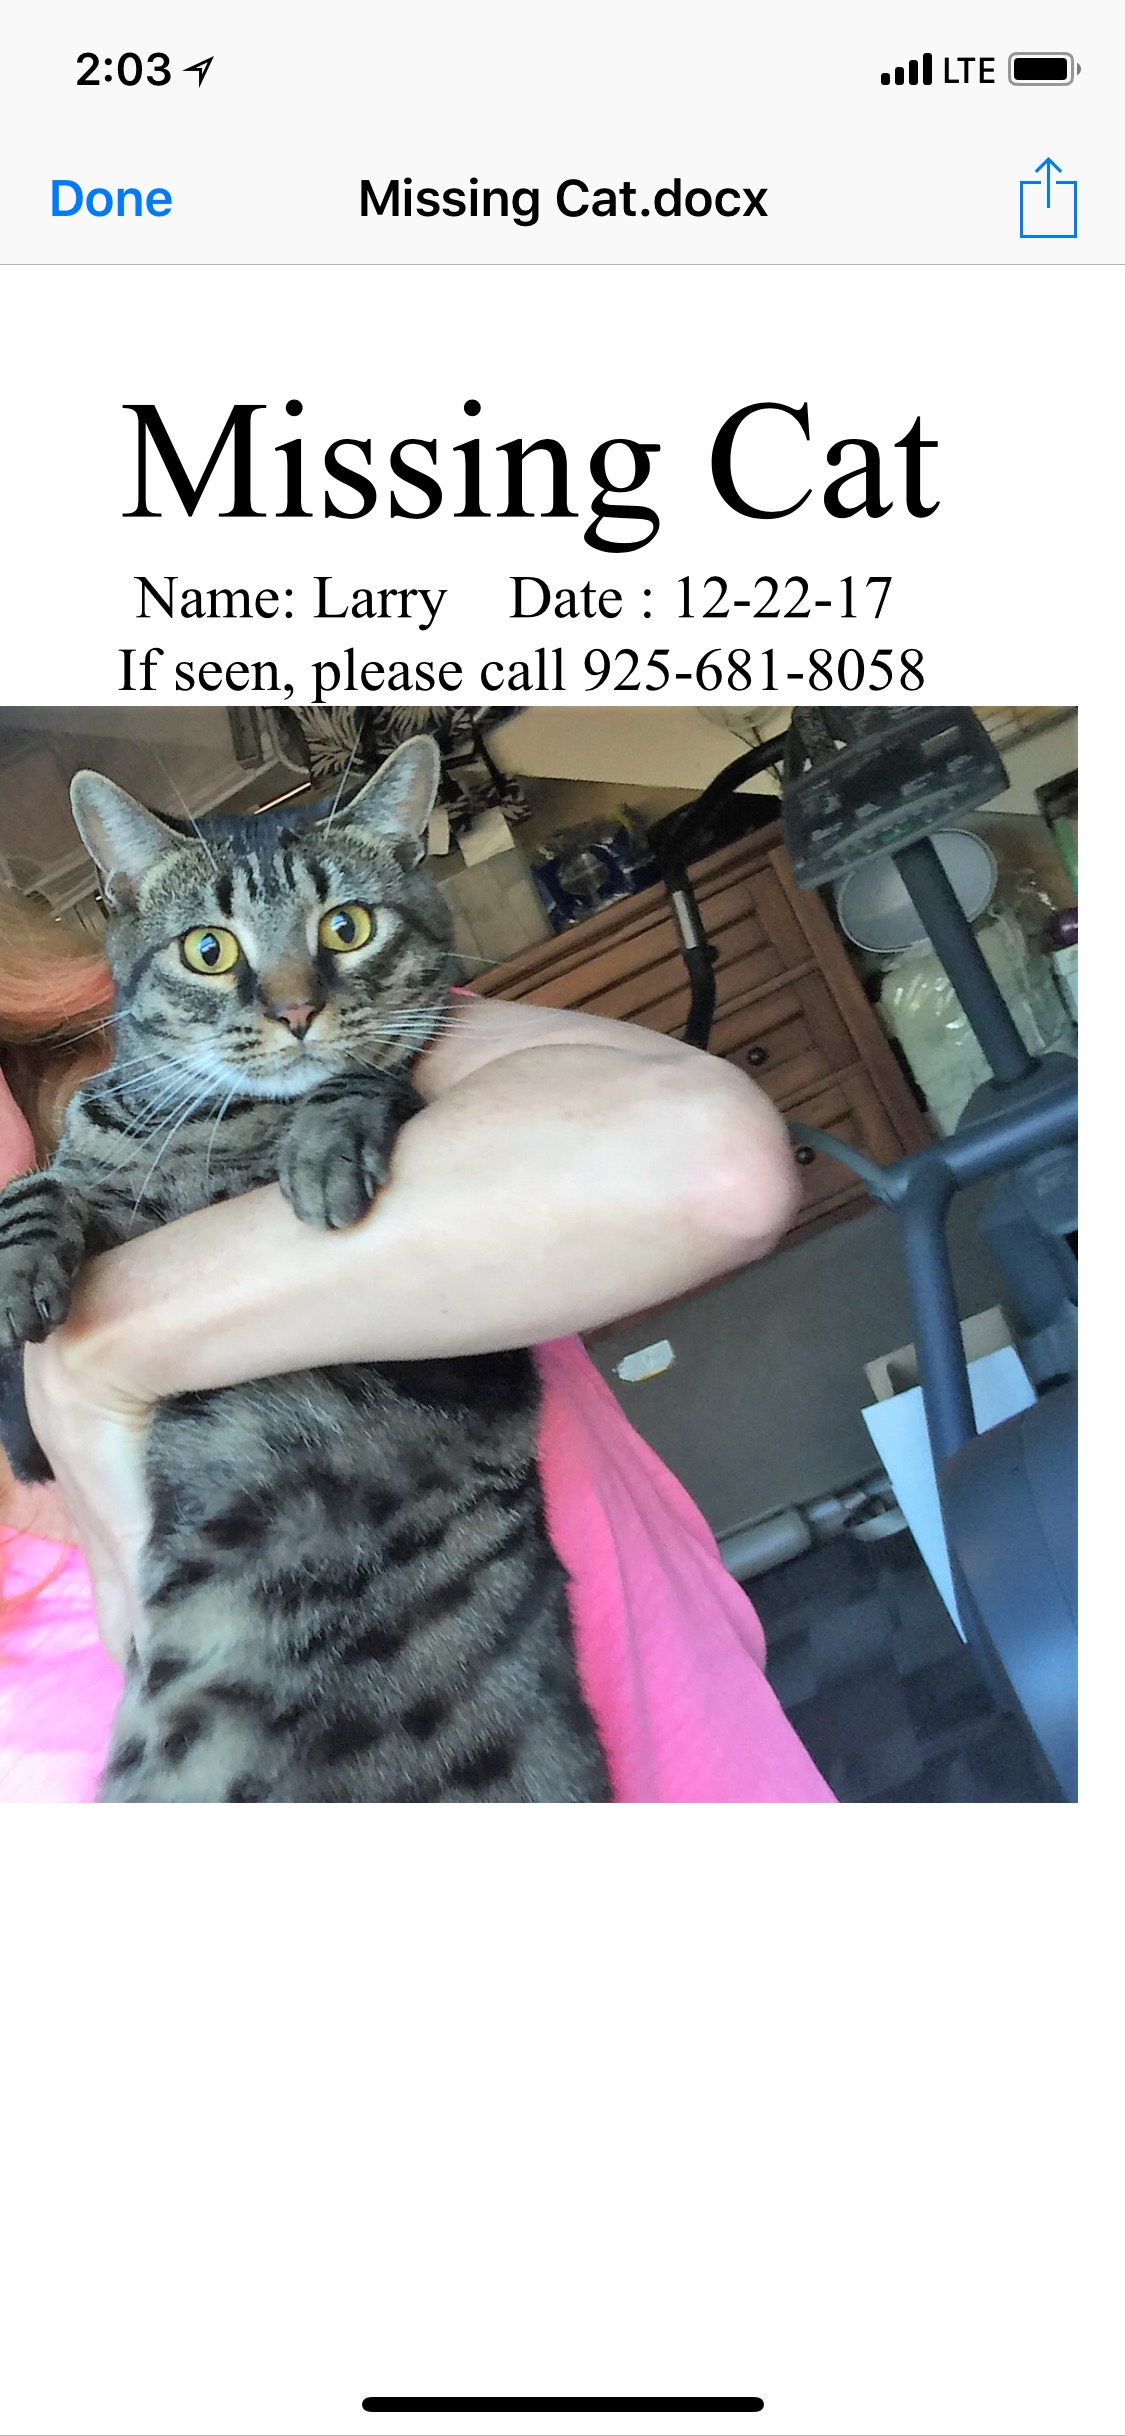 Image of Larry(or buddy), Lost Cat